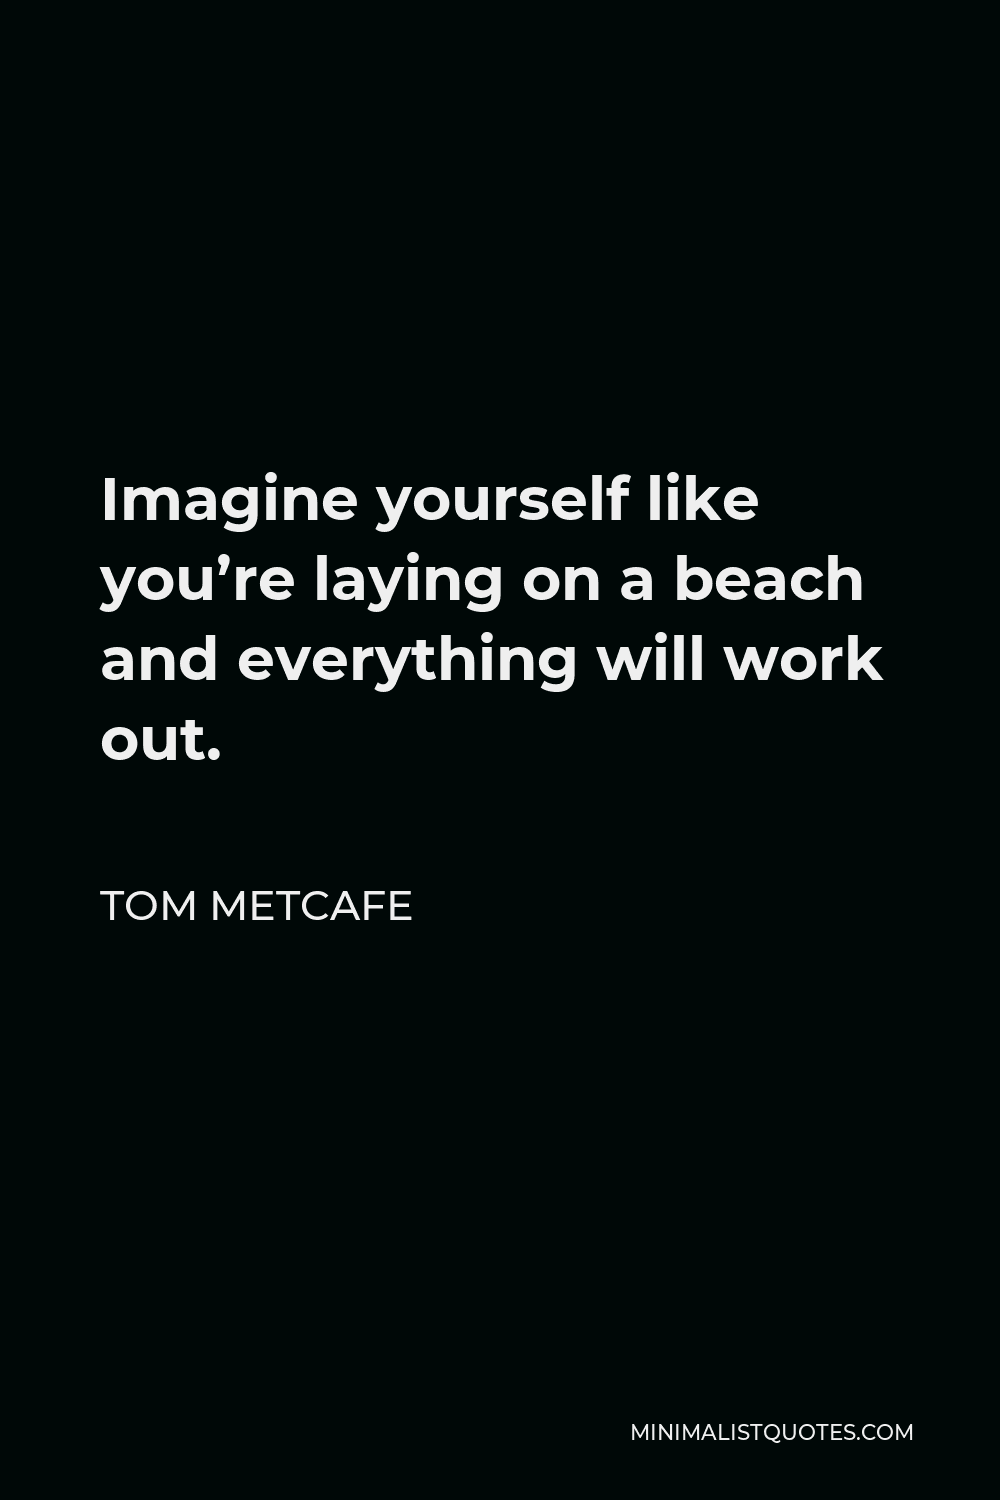 Tom Metcafe Quote - Imagine yourself like you’re laying on a beach and everything will work out.